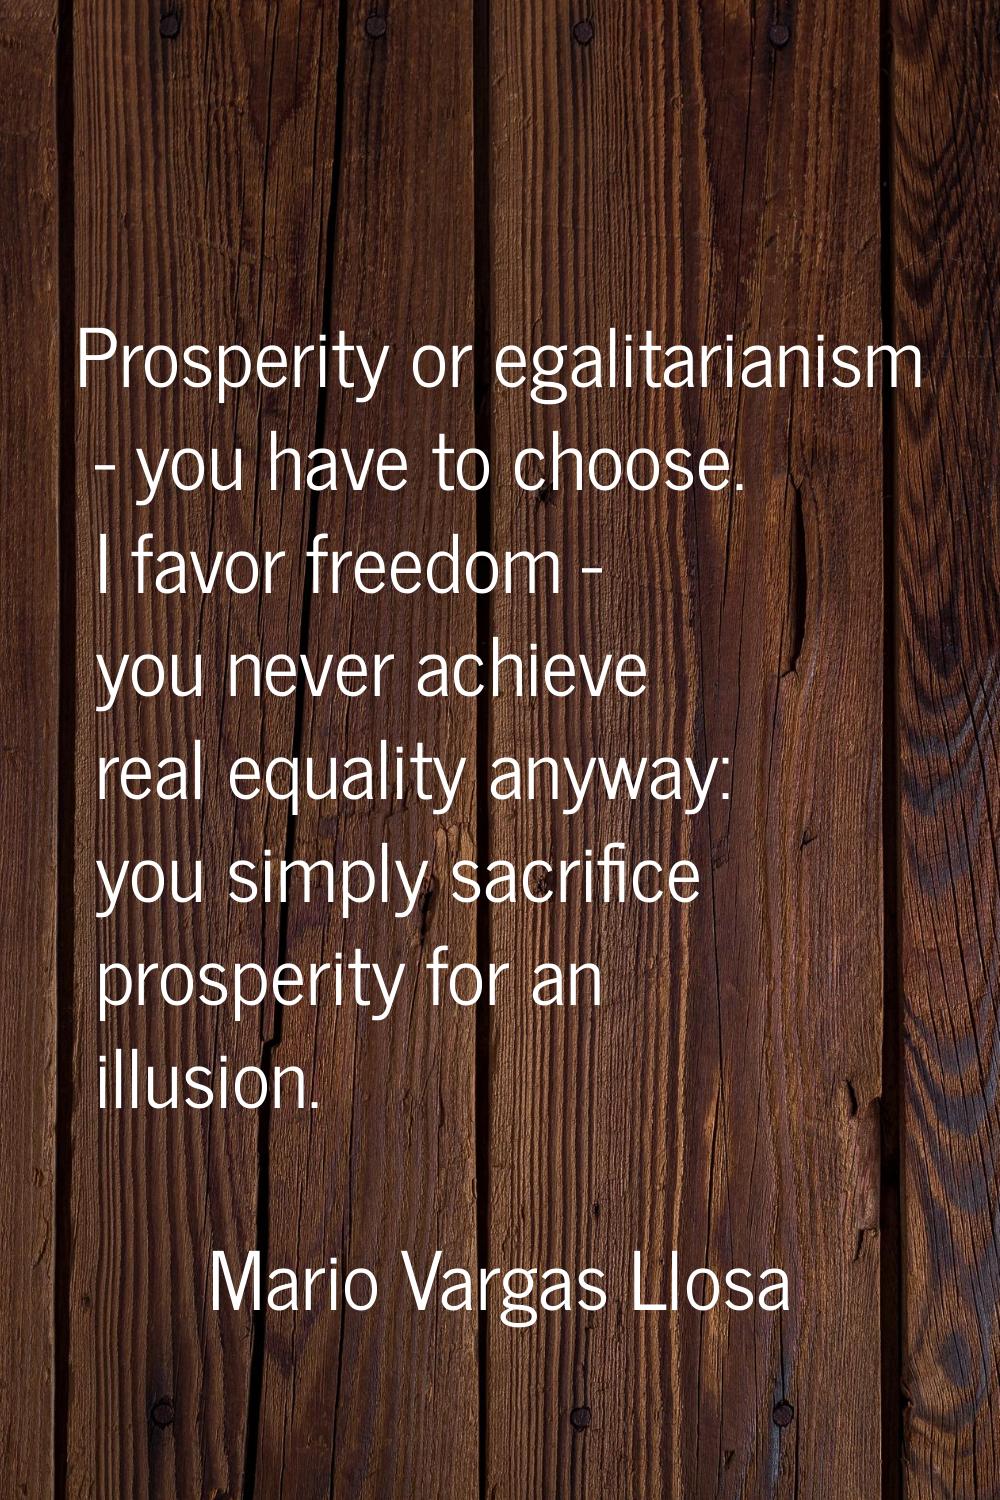 Prosperity or egalitarianism - you have to choose. I favor freedom - you never achieve real equalit